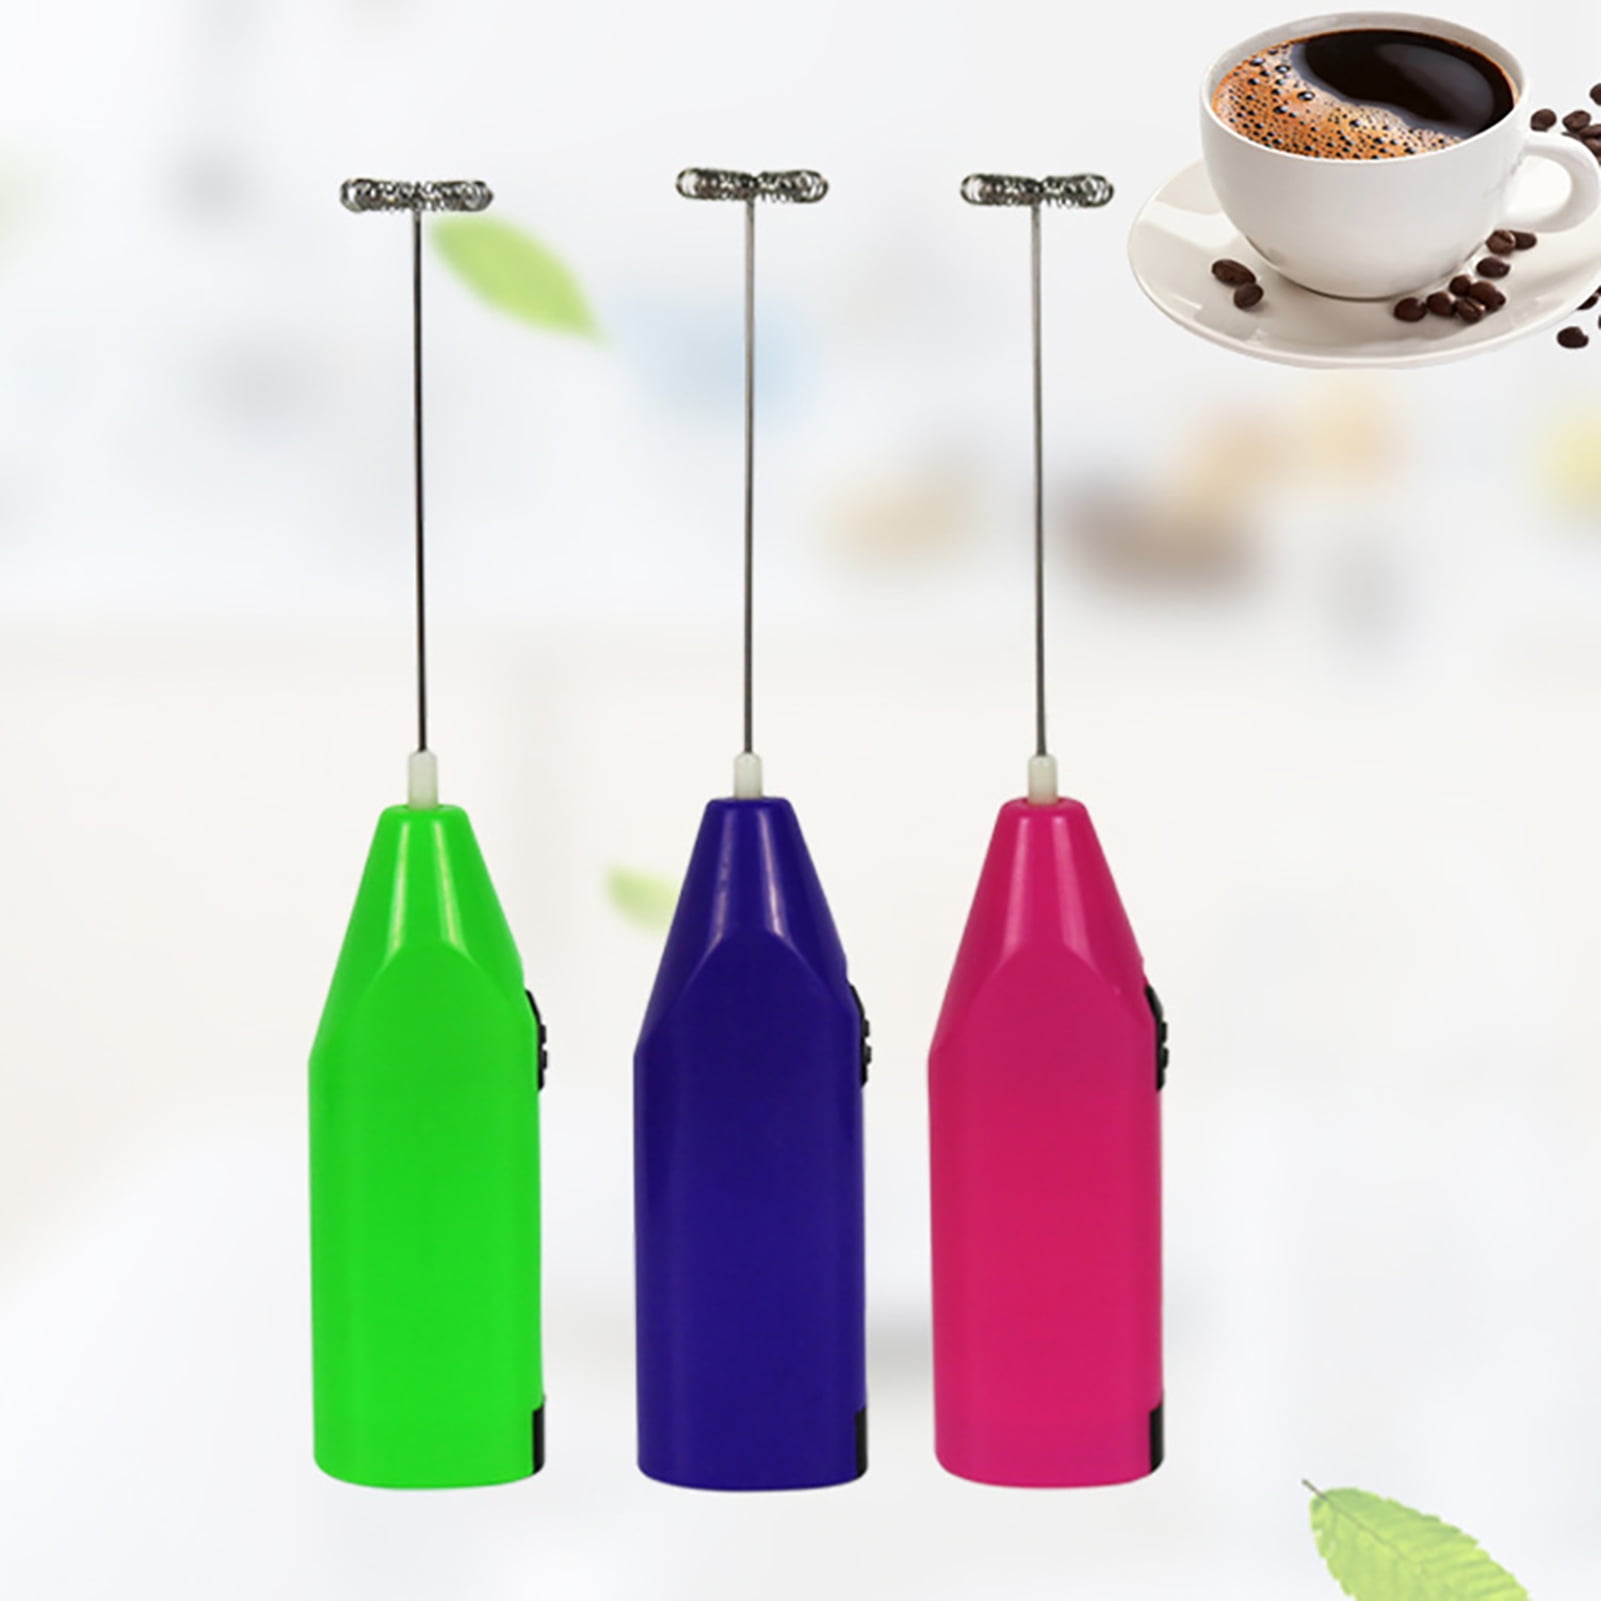 Handheld Milk Frother Wand Battery Operated Coffee Frother And Foam Maker  With Steel Whisk For Cappuccino Latte - Buy Hand Held Milk Frother,Mini